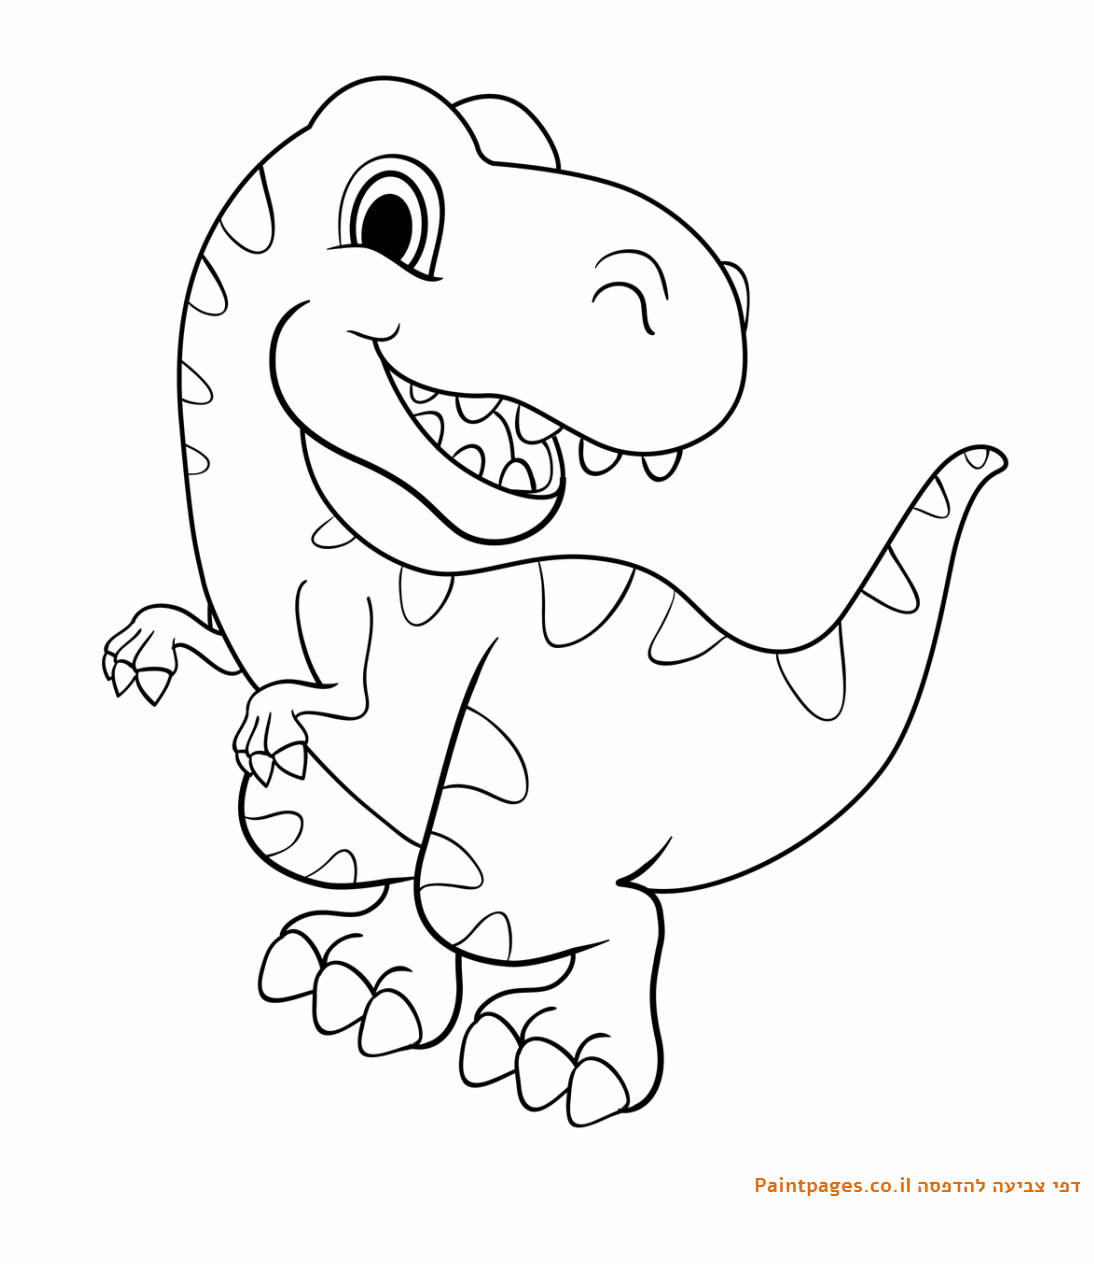 dinosaur coloring pages for toddlers baby dinosaur coloring pages to download and print for free for dinosaur coloring pages toddlers 